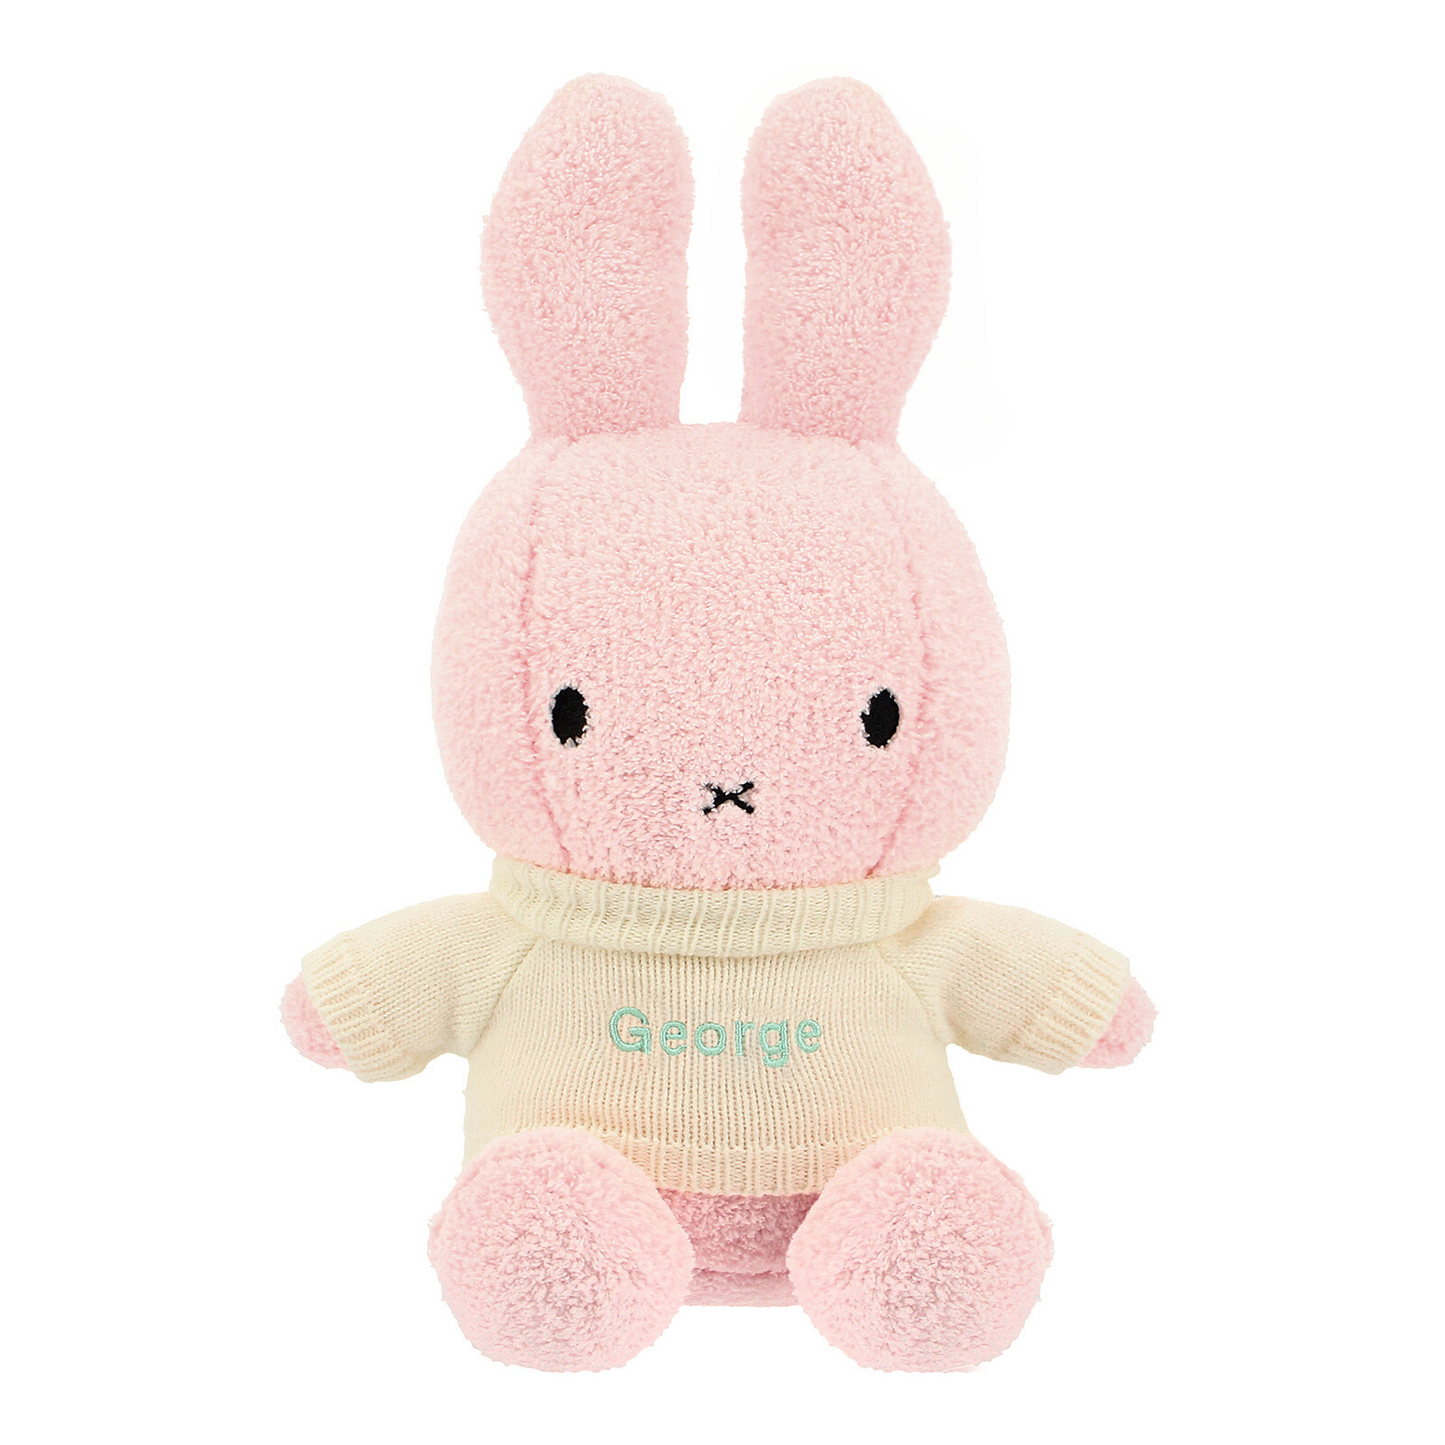 Light Pink Terry Miffy Plush (33 cm) with Name Embroidery on Sweater